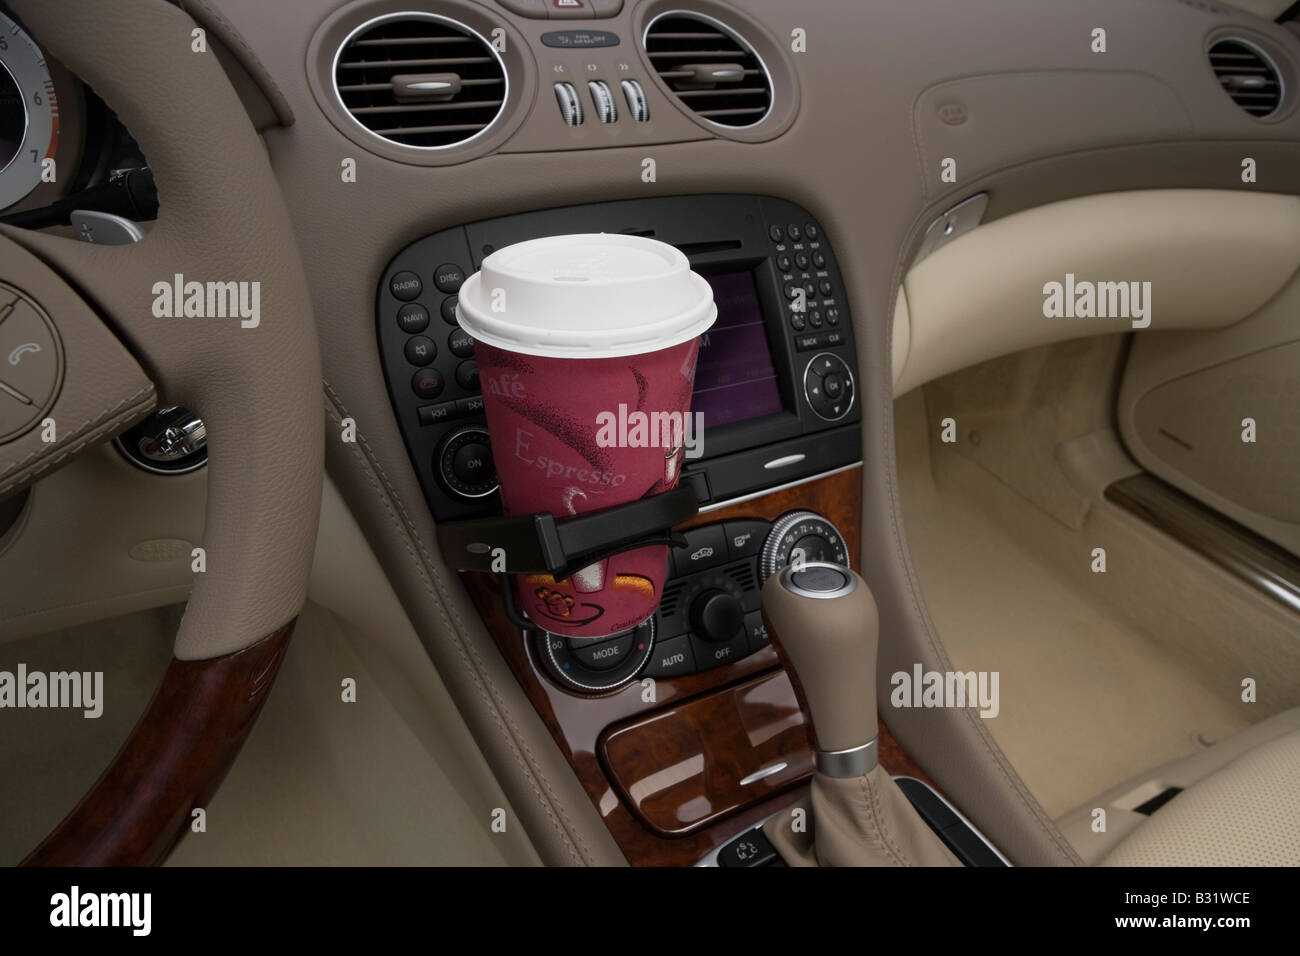 https://c8.alamy.com/comp/B31WCE/2009-mercedes-benz-sl-series-sl550-in-black-cup-holder-with-prop-B31WCE.jpg